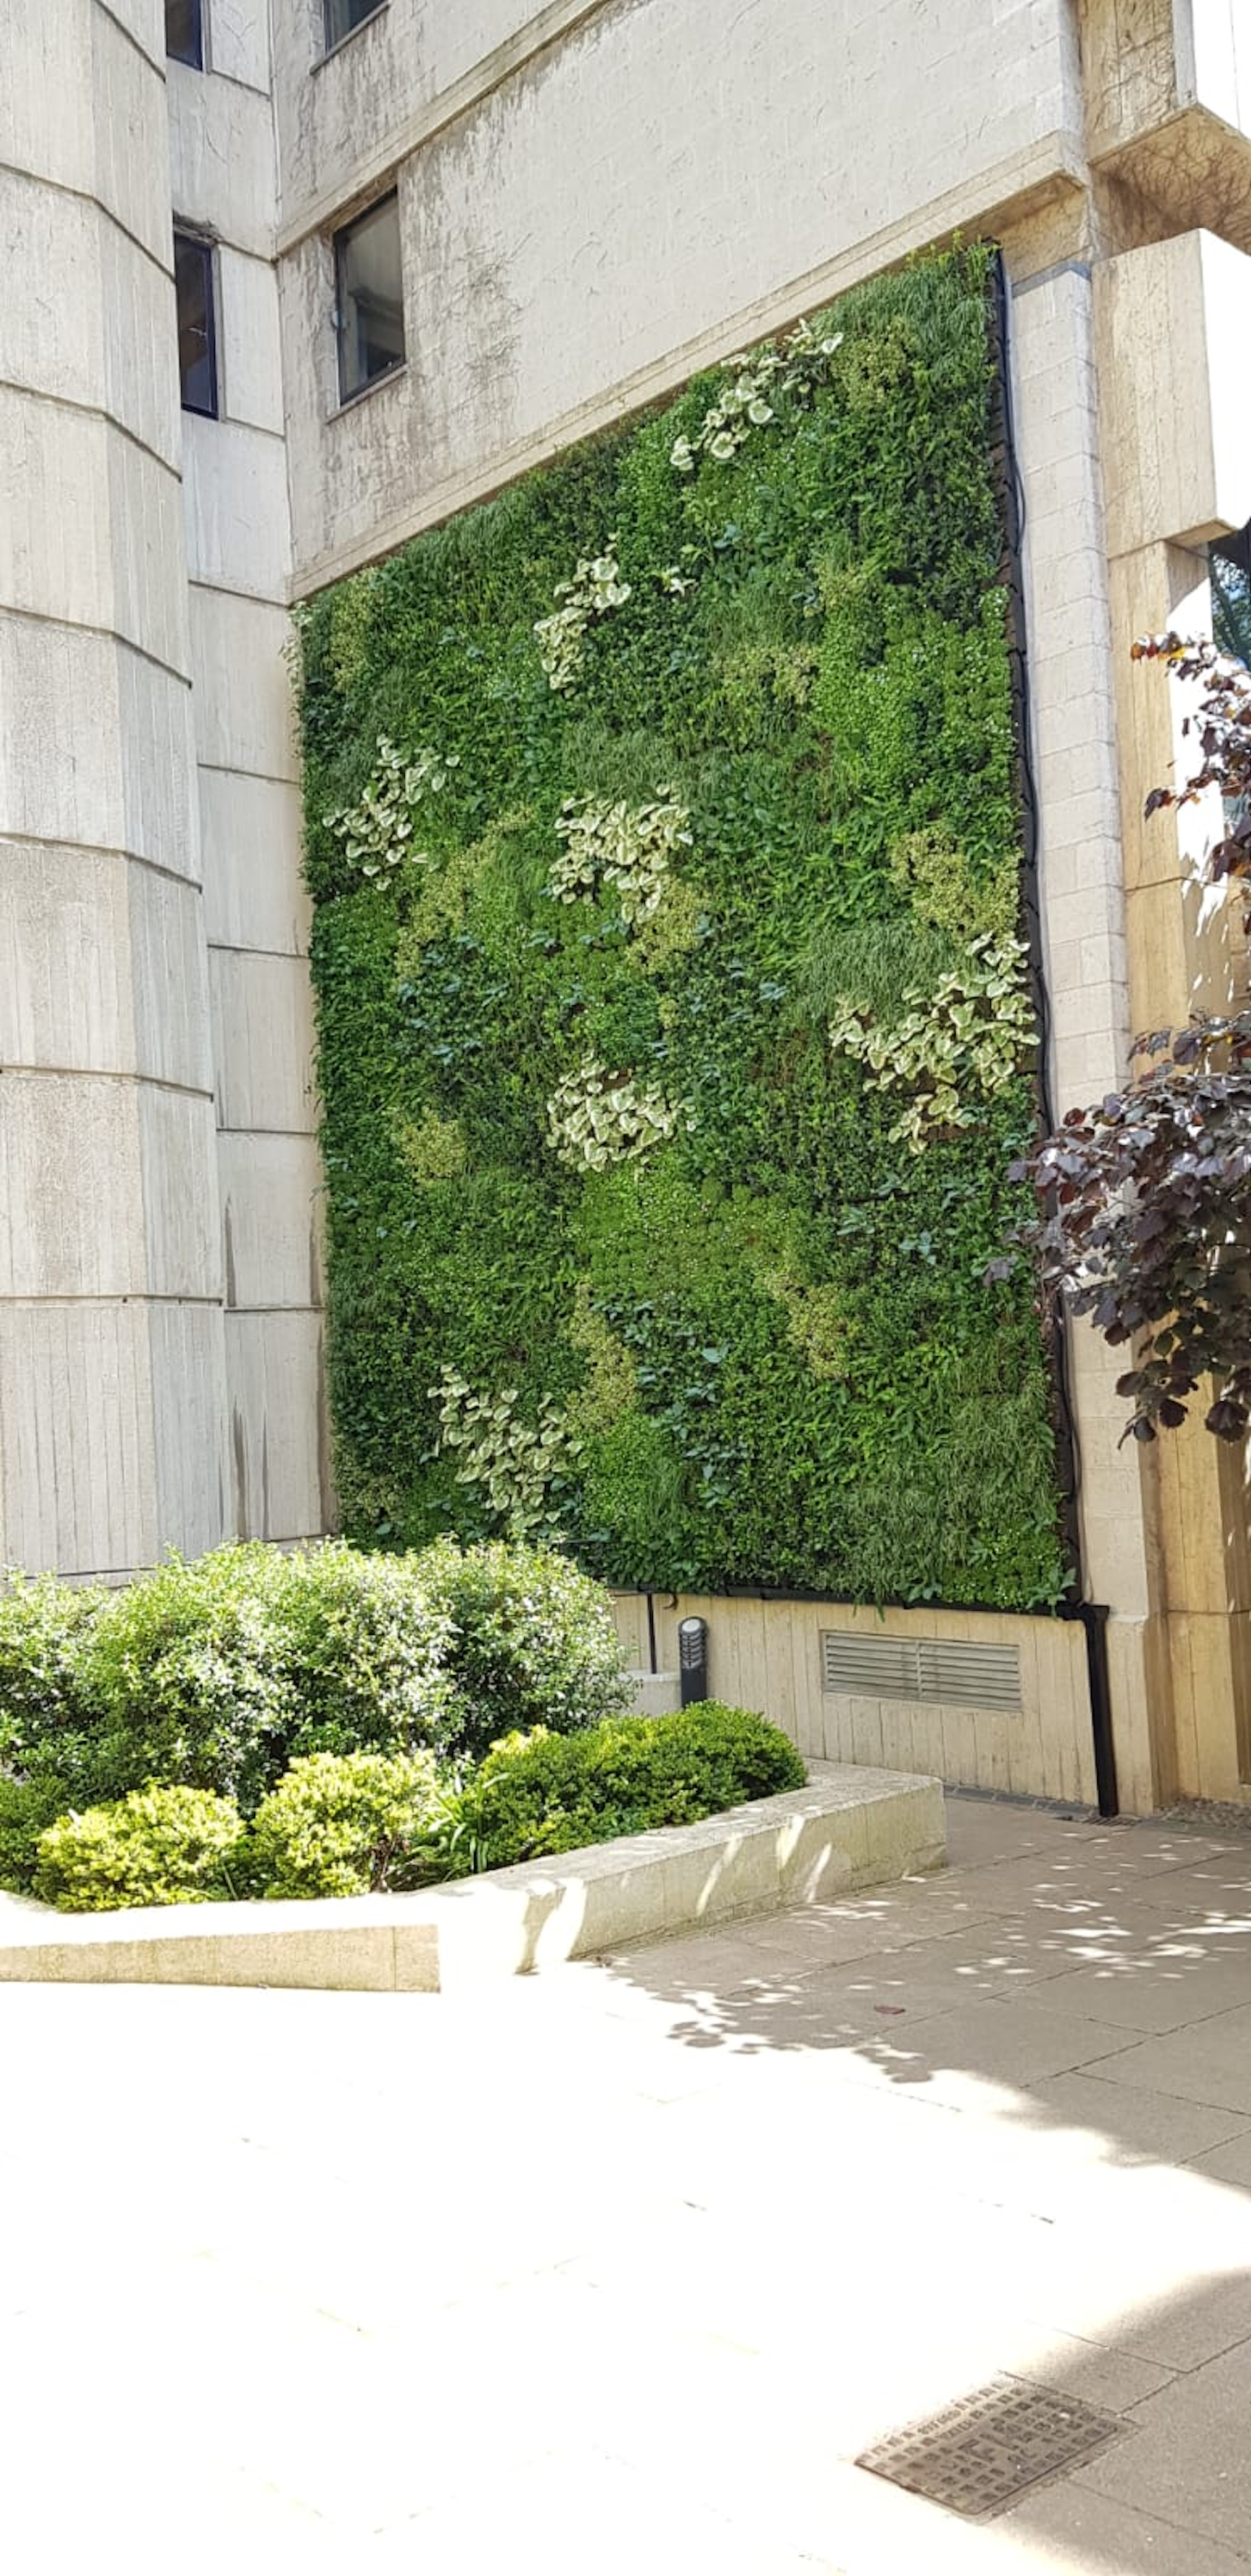 green wall with a variety of evergreen species